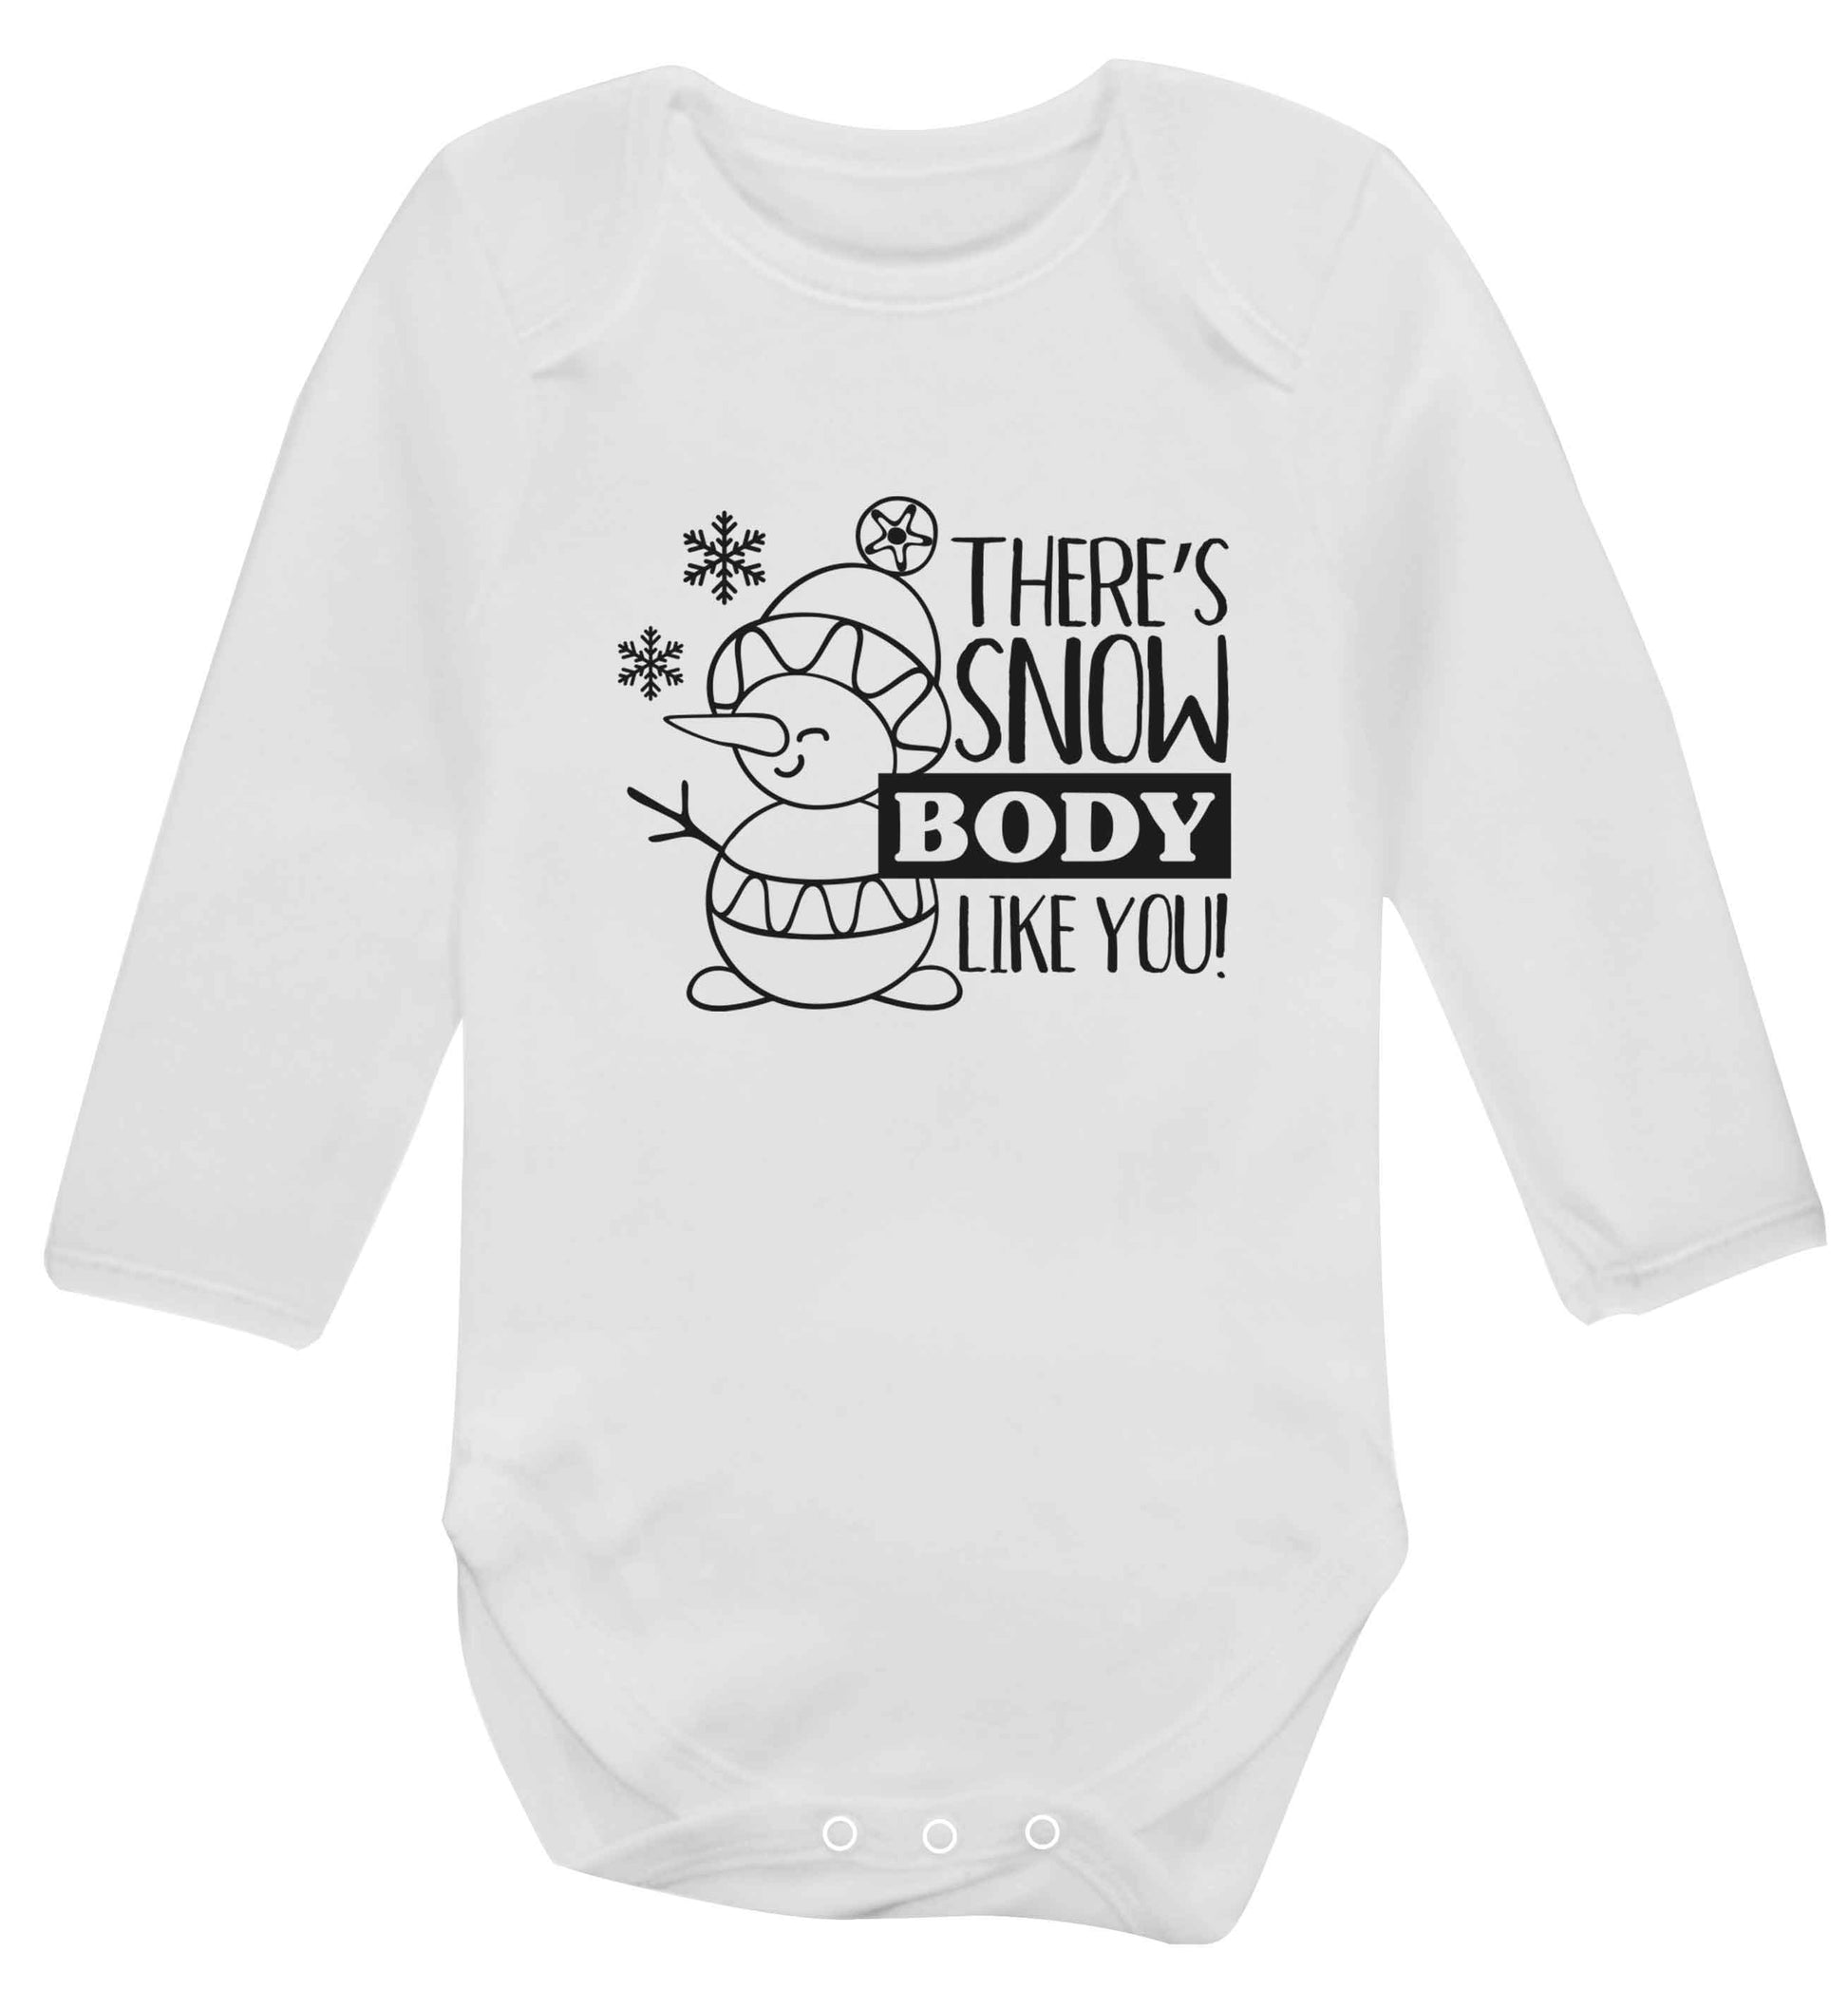 There's snow body like you baby vest long sleeved white 6-12 months